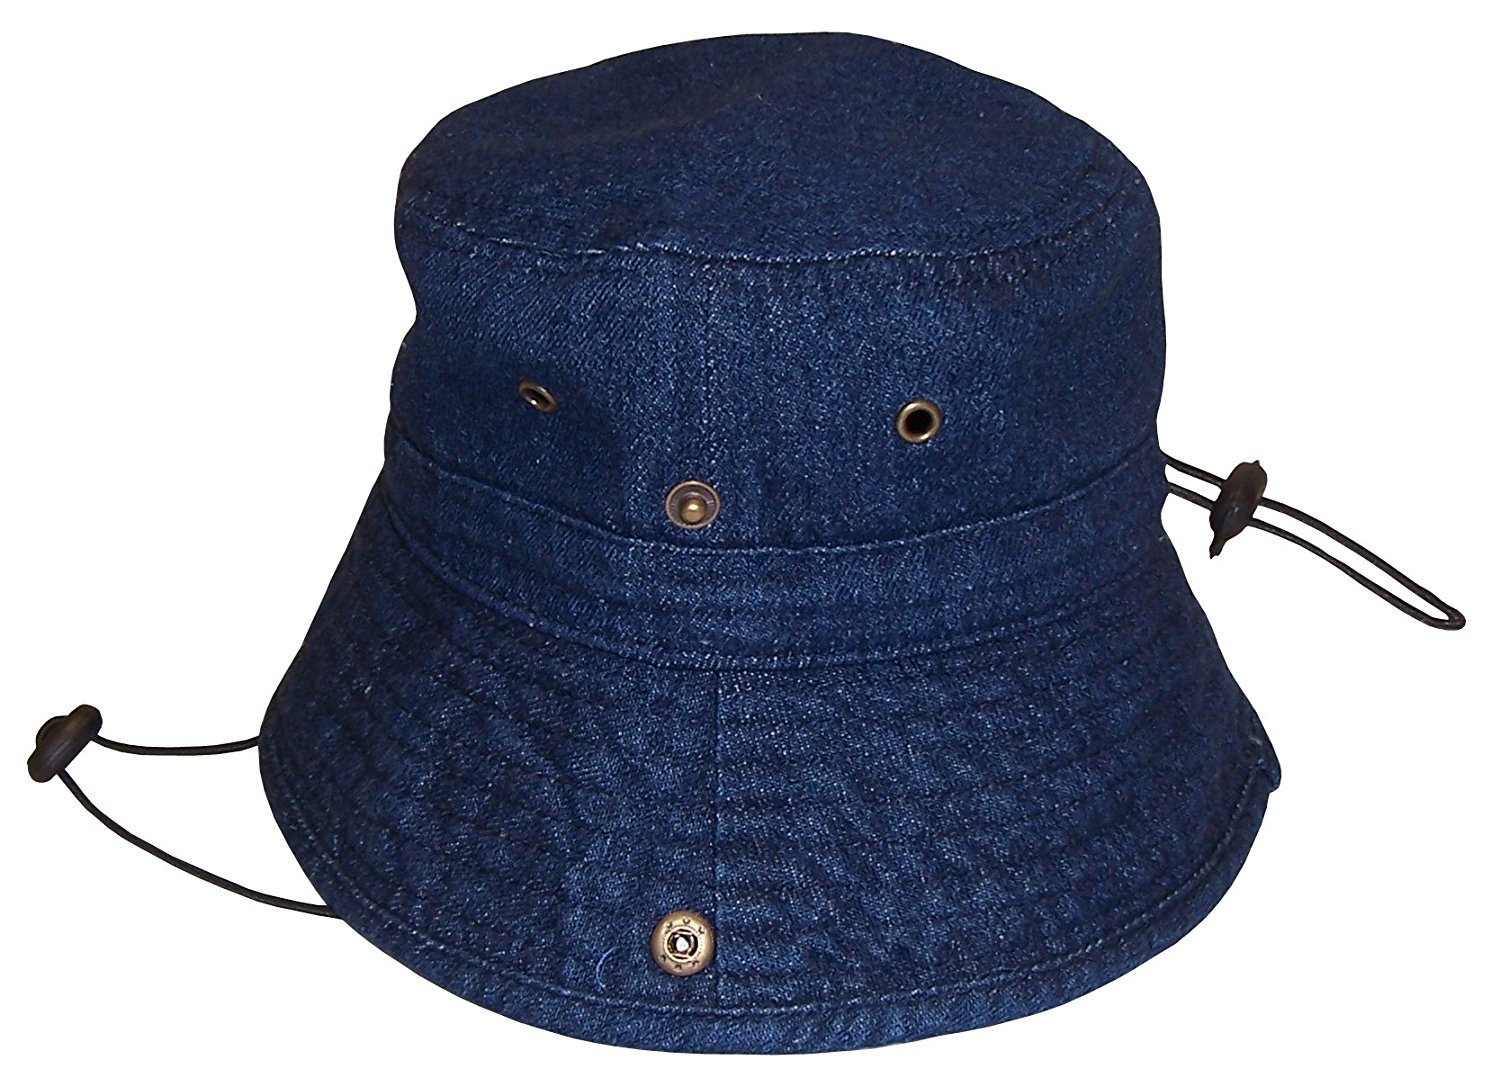 NICE CAPS Kids Distressed and Washed Denim Cotton Bucket Hat - image 2 of 2